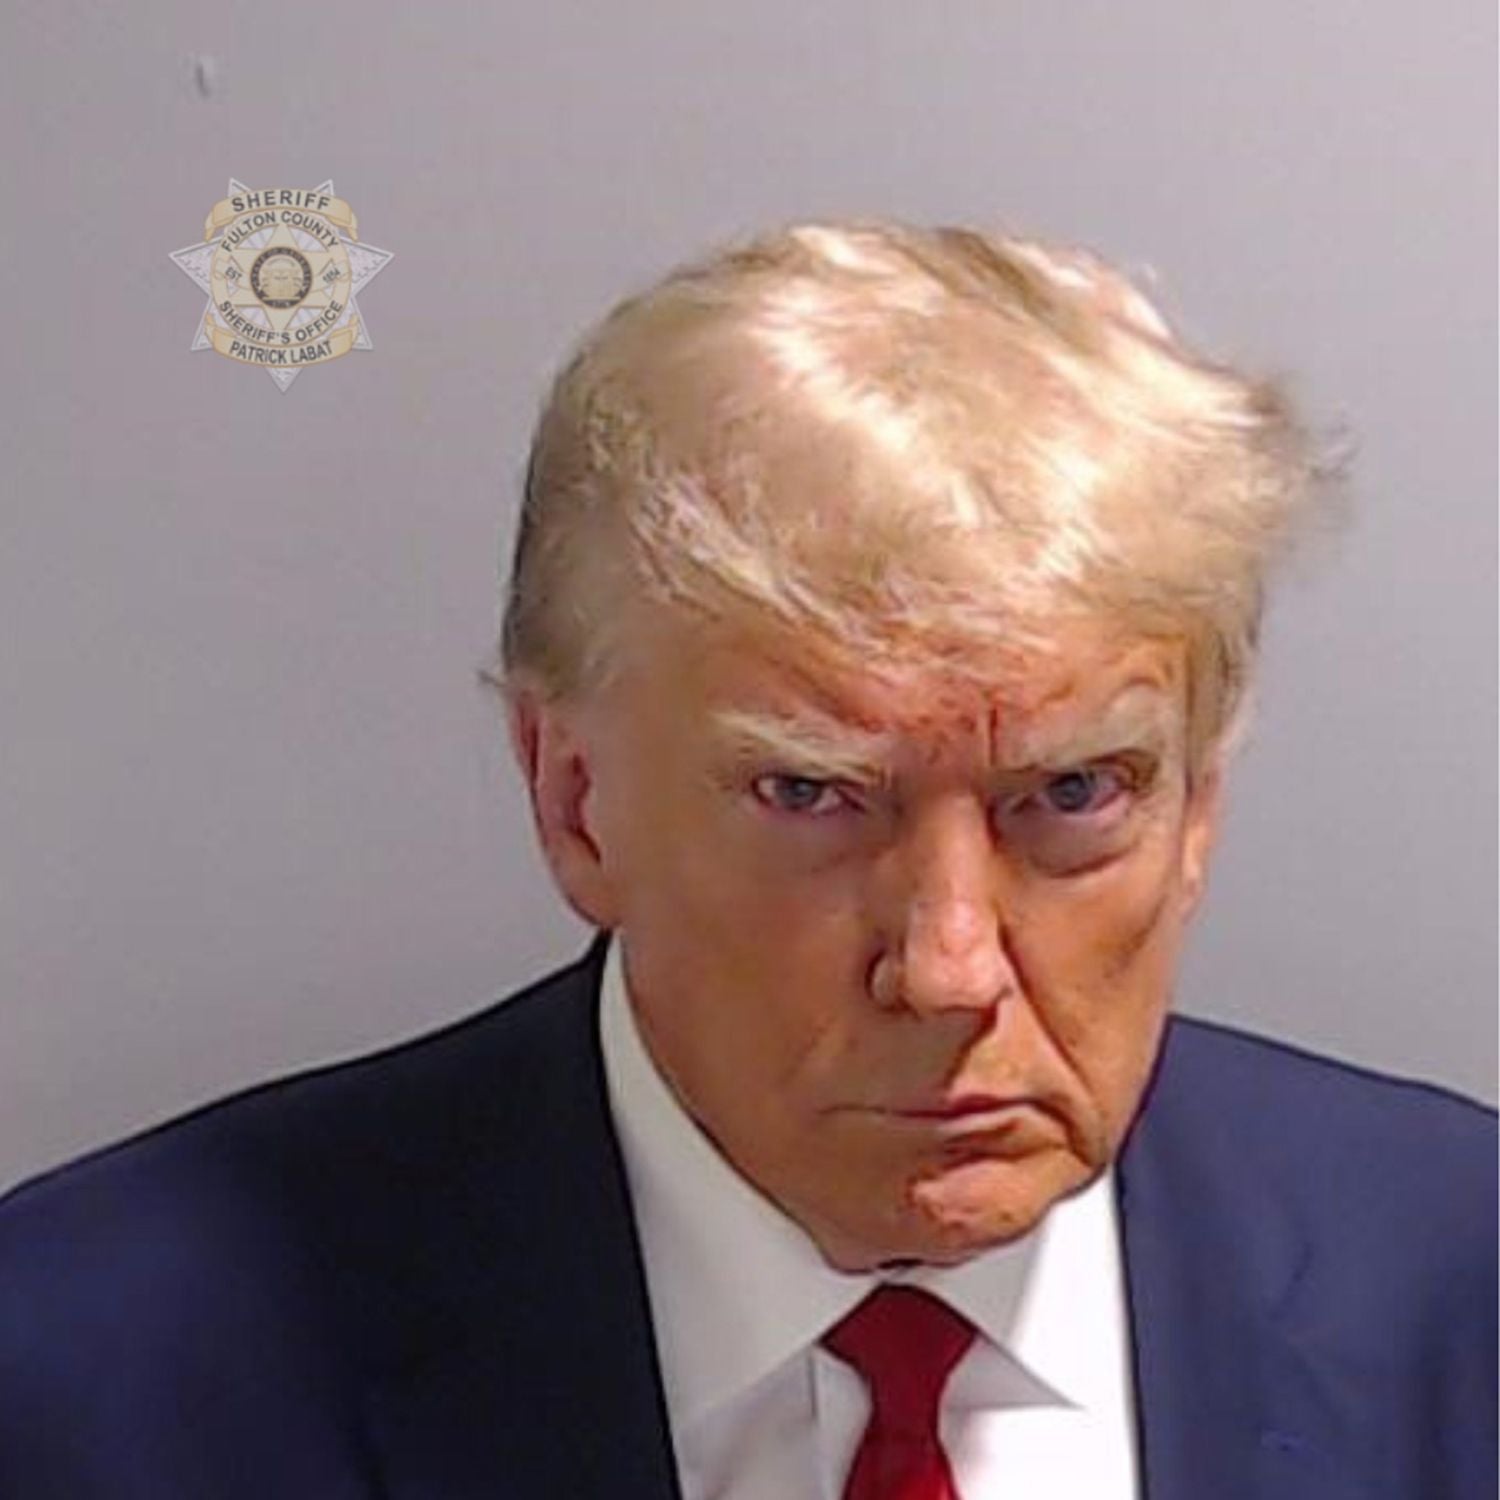 In this handout provided by the Fulton County Sheriff's Office, former U.S. President Donald Trump poses for his booking photo at the Fulton County Jail on August 24, 2023 in Atlanta, Georgia.